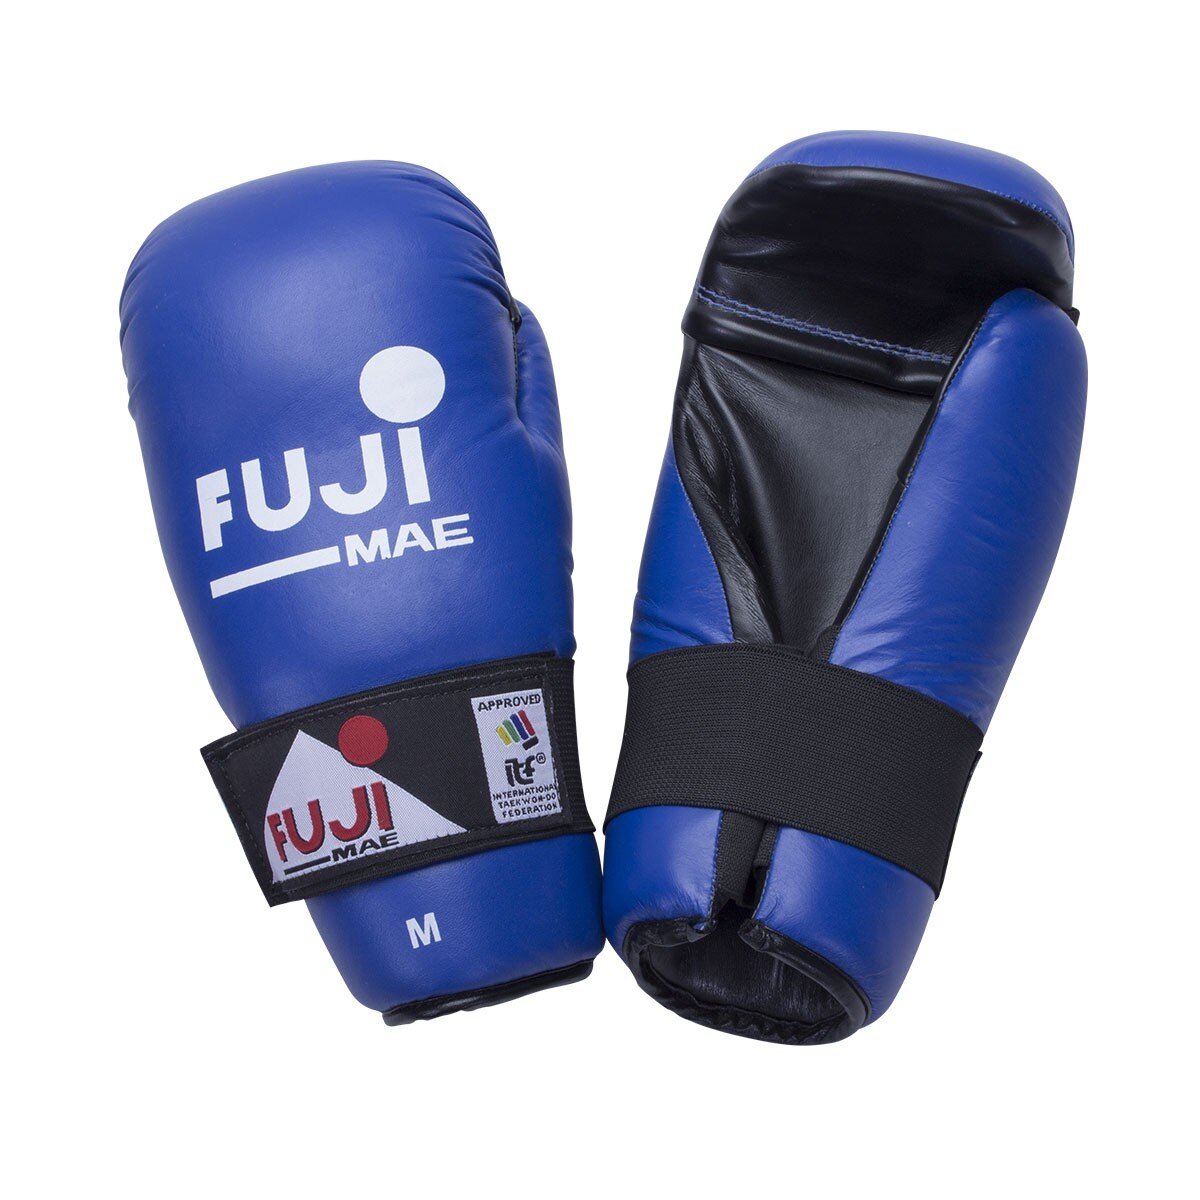 FUJI MAE ITF APPROVED POINT SPARRING GLOVES BLUE - X-LARGE